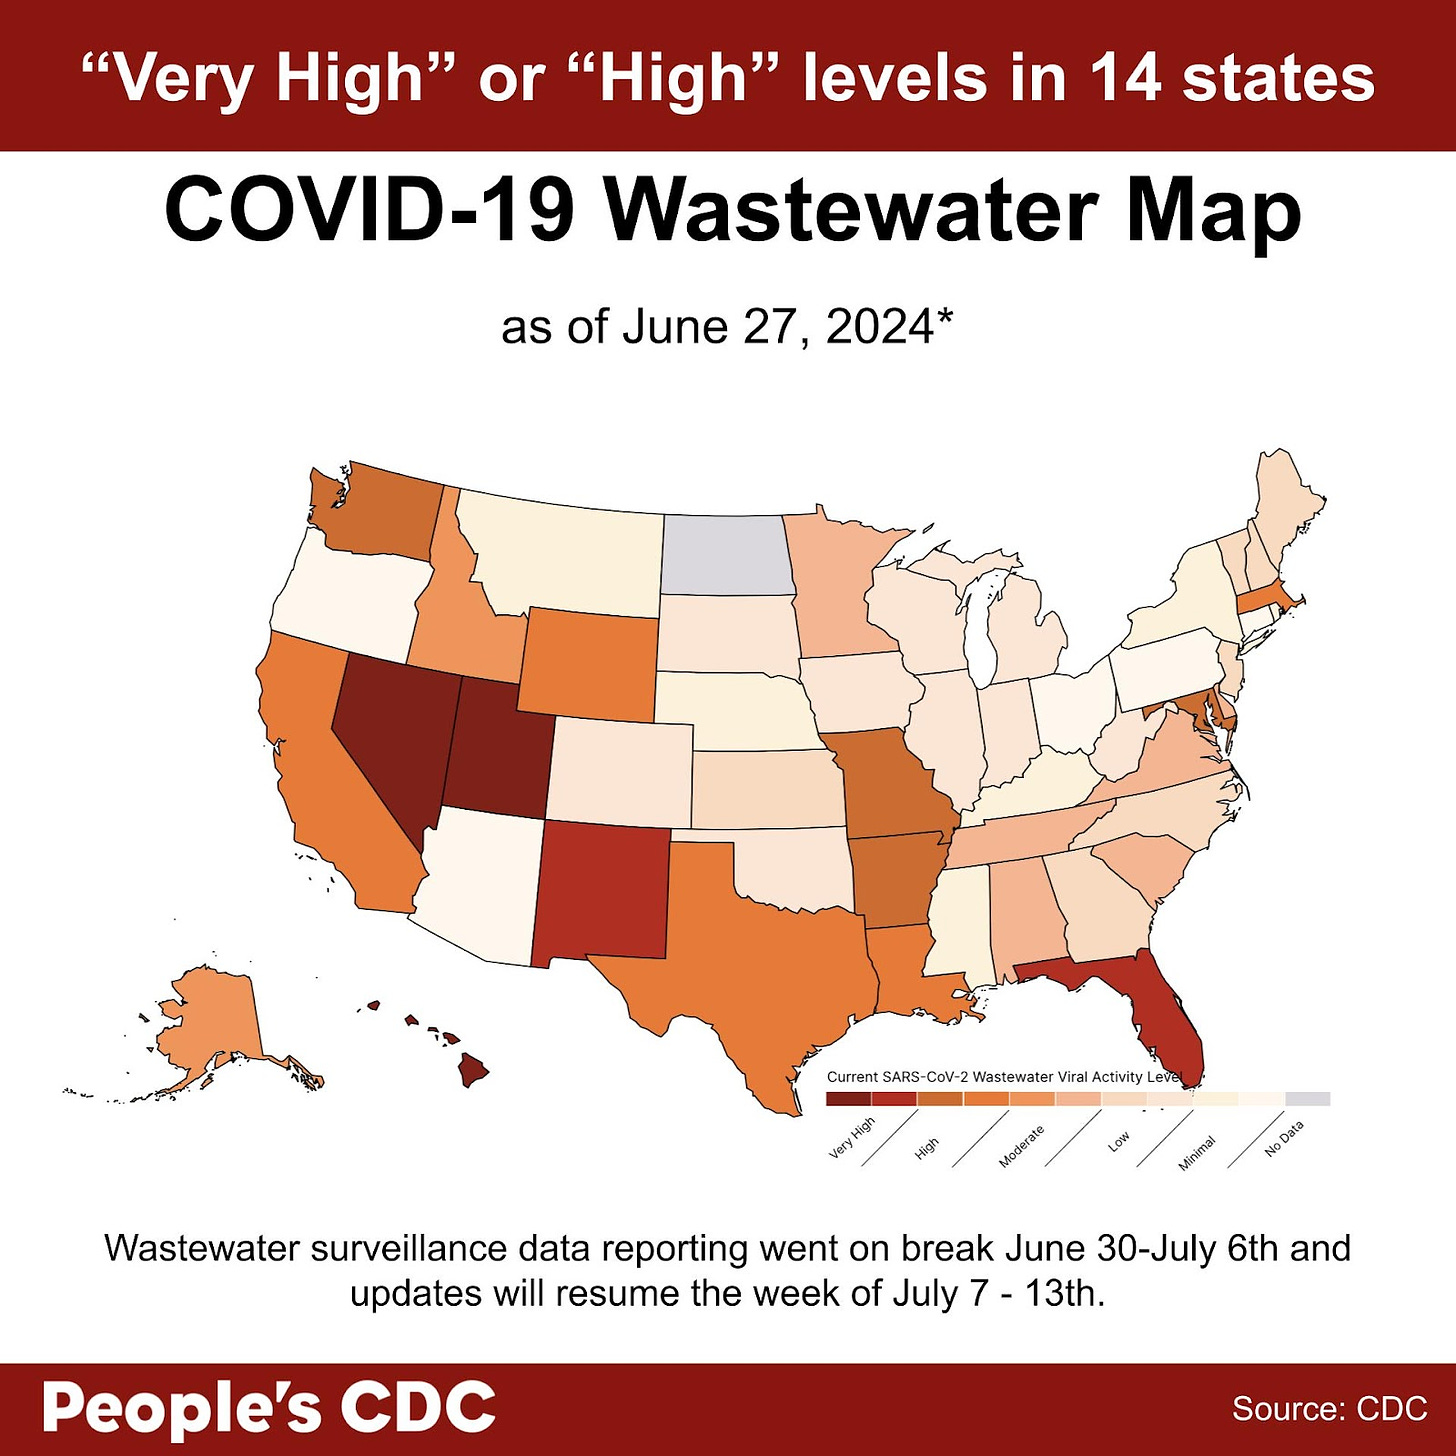 A map of the United States color-coded in shades of orange and gray displaying SARS-CoV-2 Wastewater Viral Activity level as of June 27, 2024, where deeper tones correlate to higher viral activity and gray indicates “Insufficient,” or “No Data.” Viral activity is shown as “Very High” or “High” in 14 states, and “moderate” in Minnesota, Delaware, Alaska, Virginia, Alabama, Tennessee, Idaho, and South Carolina.  No data is available for North Dakota, Puerto Rico, the U.S. Virgin Islands, the District Of Columbia, or Guam. Text above map reads “”Very High " or "High" levels in 14 states. People’s CDC. Source: CDC.”